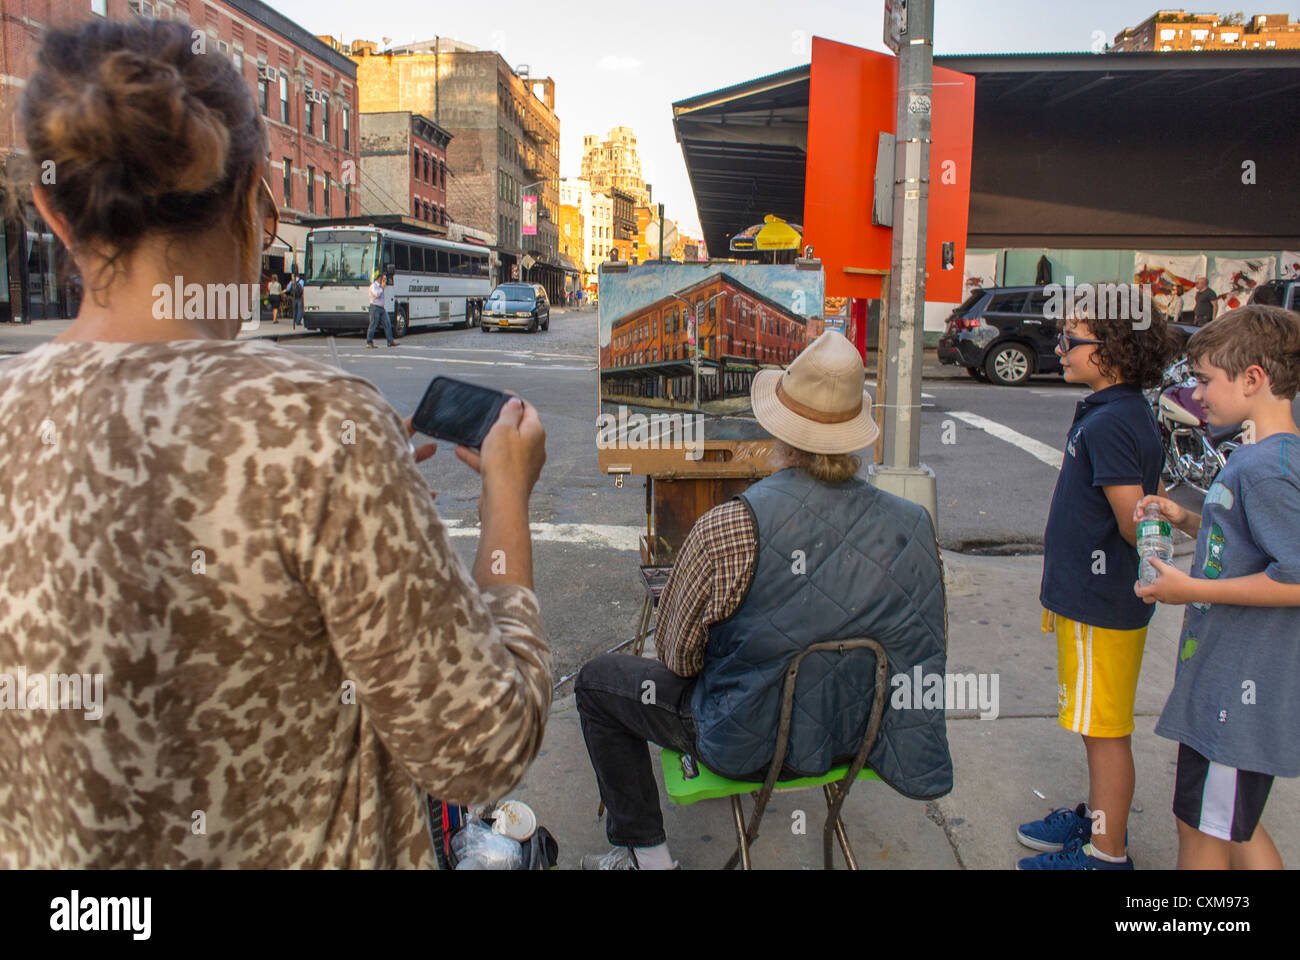 New York City, NY, USA, Street Scenes in the Meatpacking District, Family Meeting Street Artist, painting amateur, people gathered ny streets, street boys looking Stock Photo